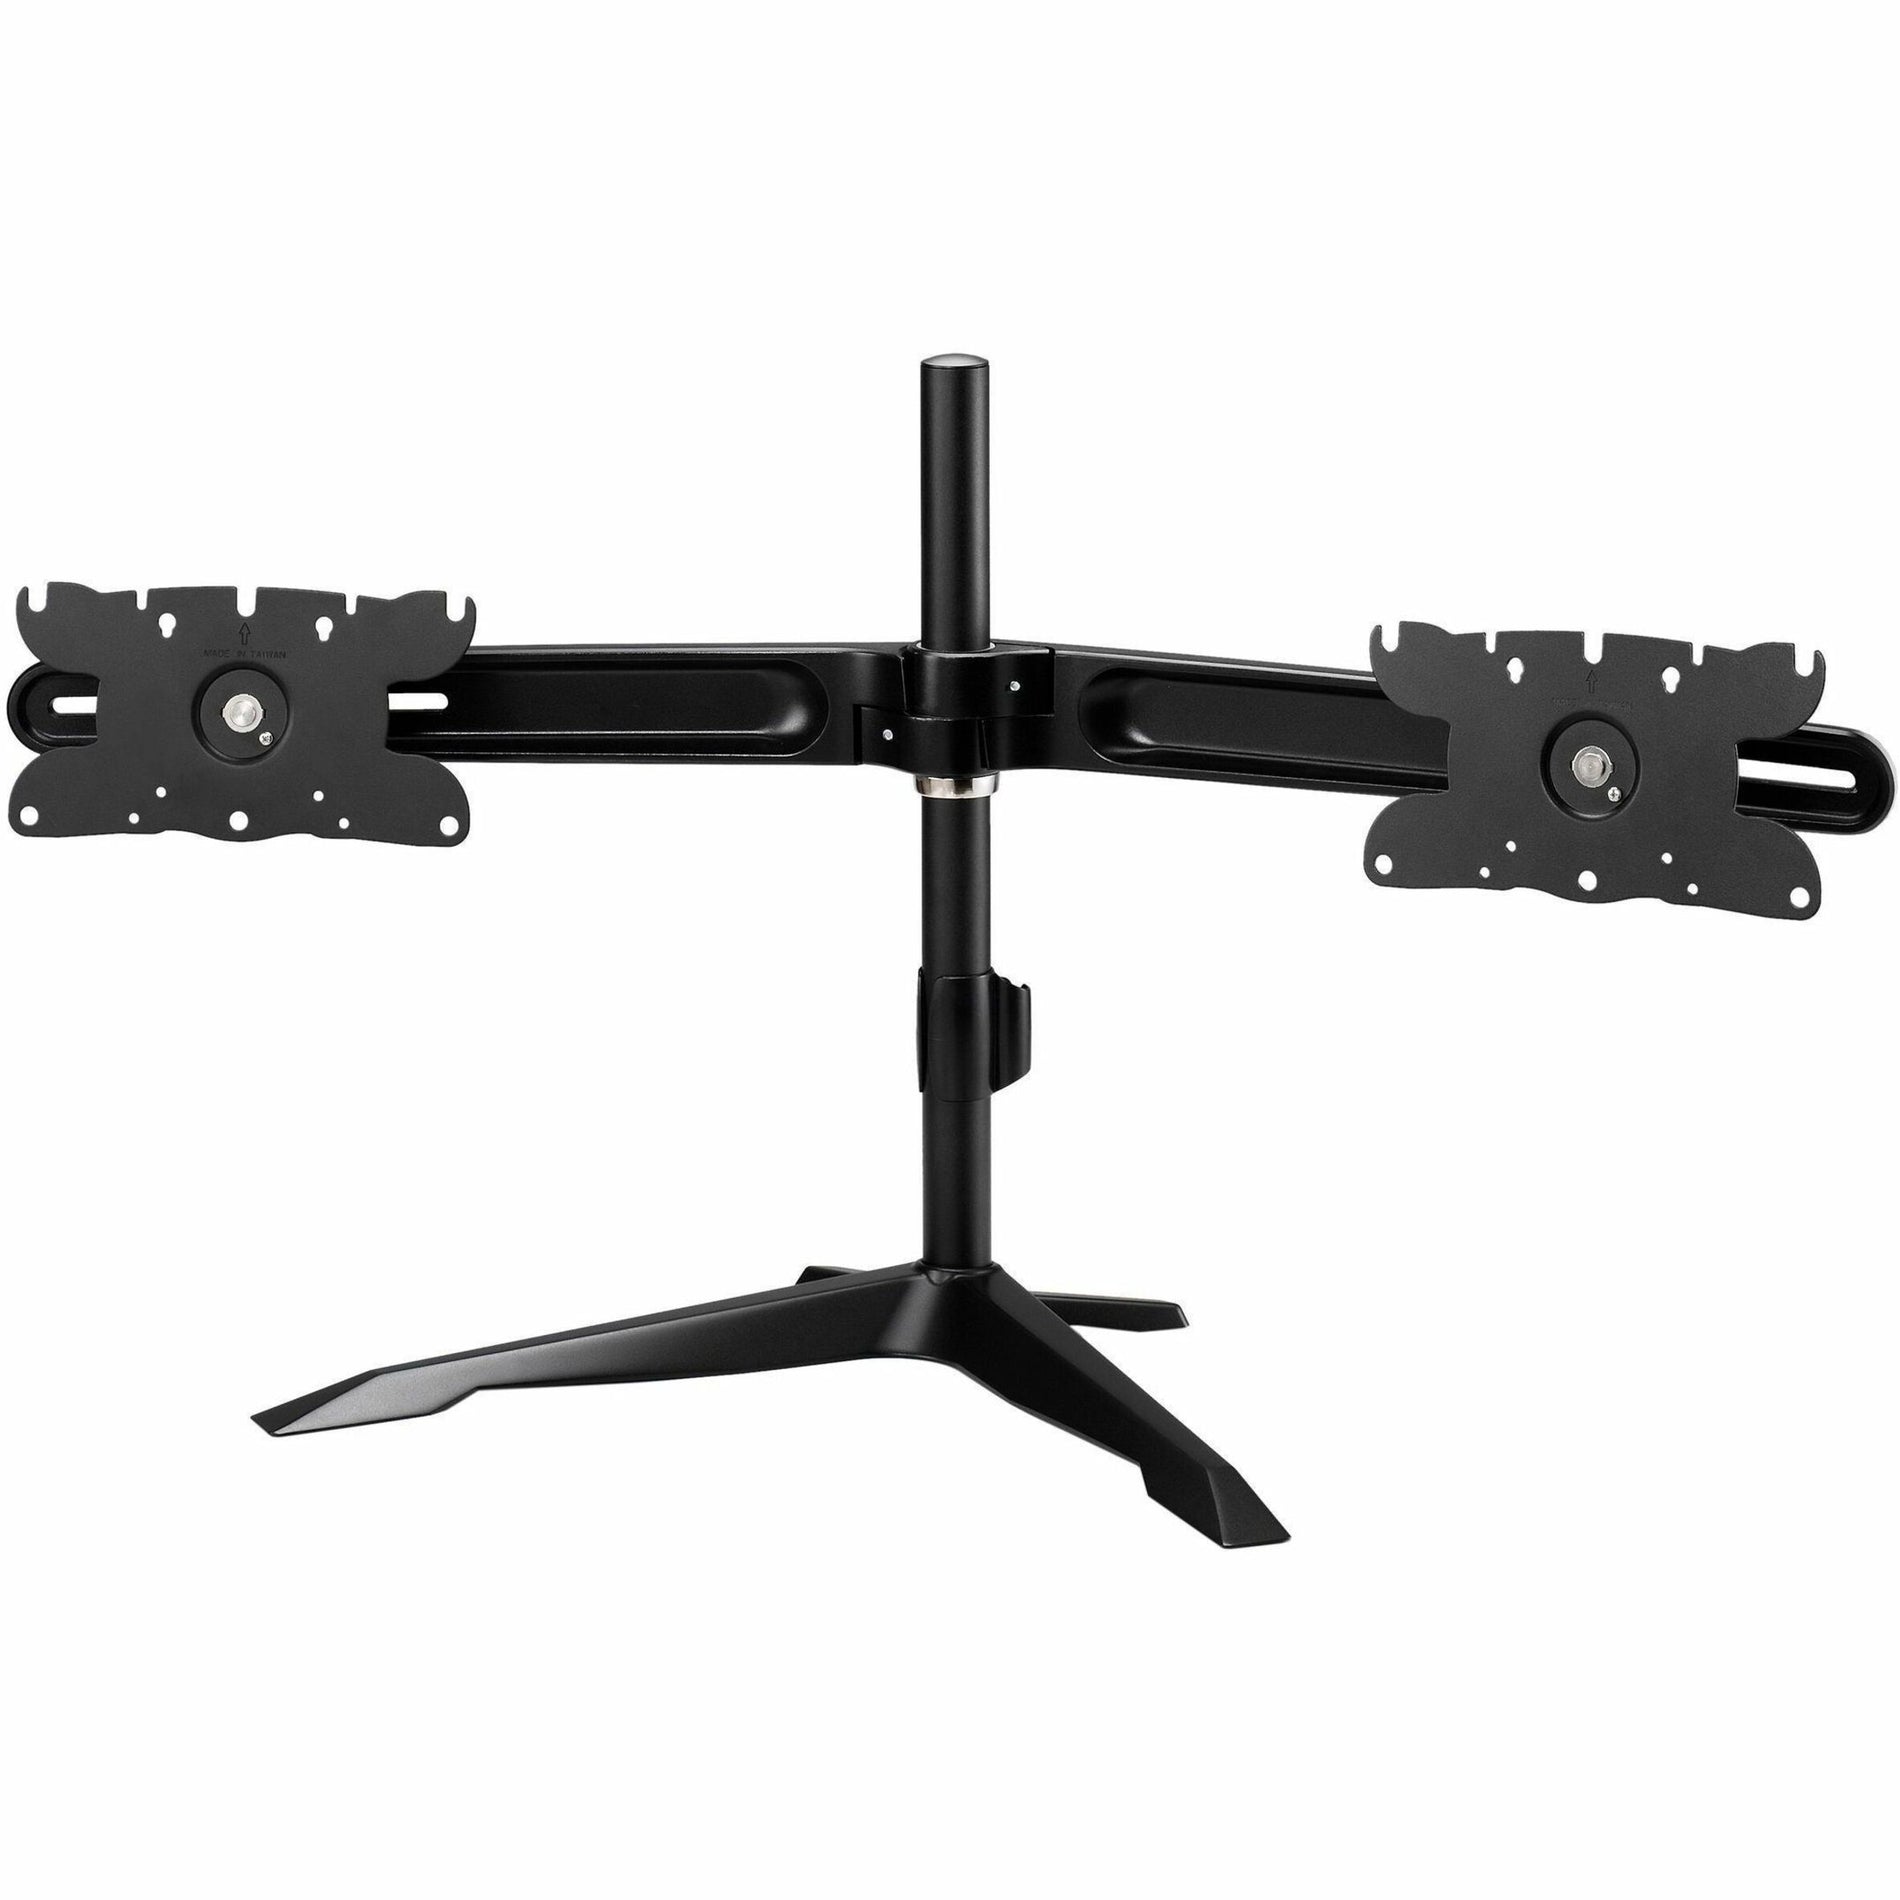 Amer AMR2S32U Dual Monitor Stand for Up to 32" Displays, Swivel, Rotation, Cable Management, Ergonomic, Tilt